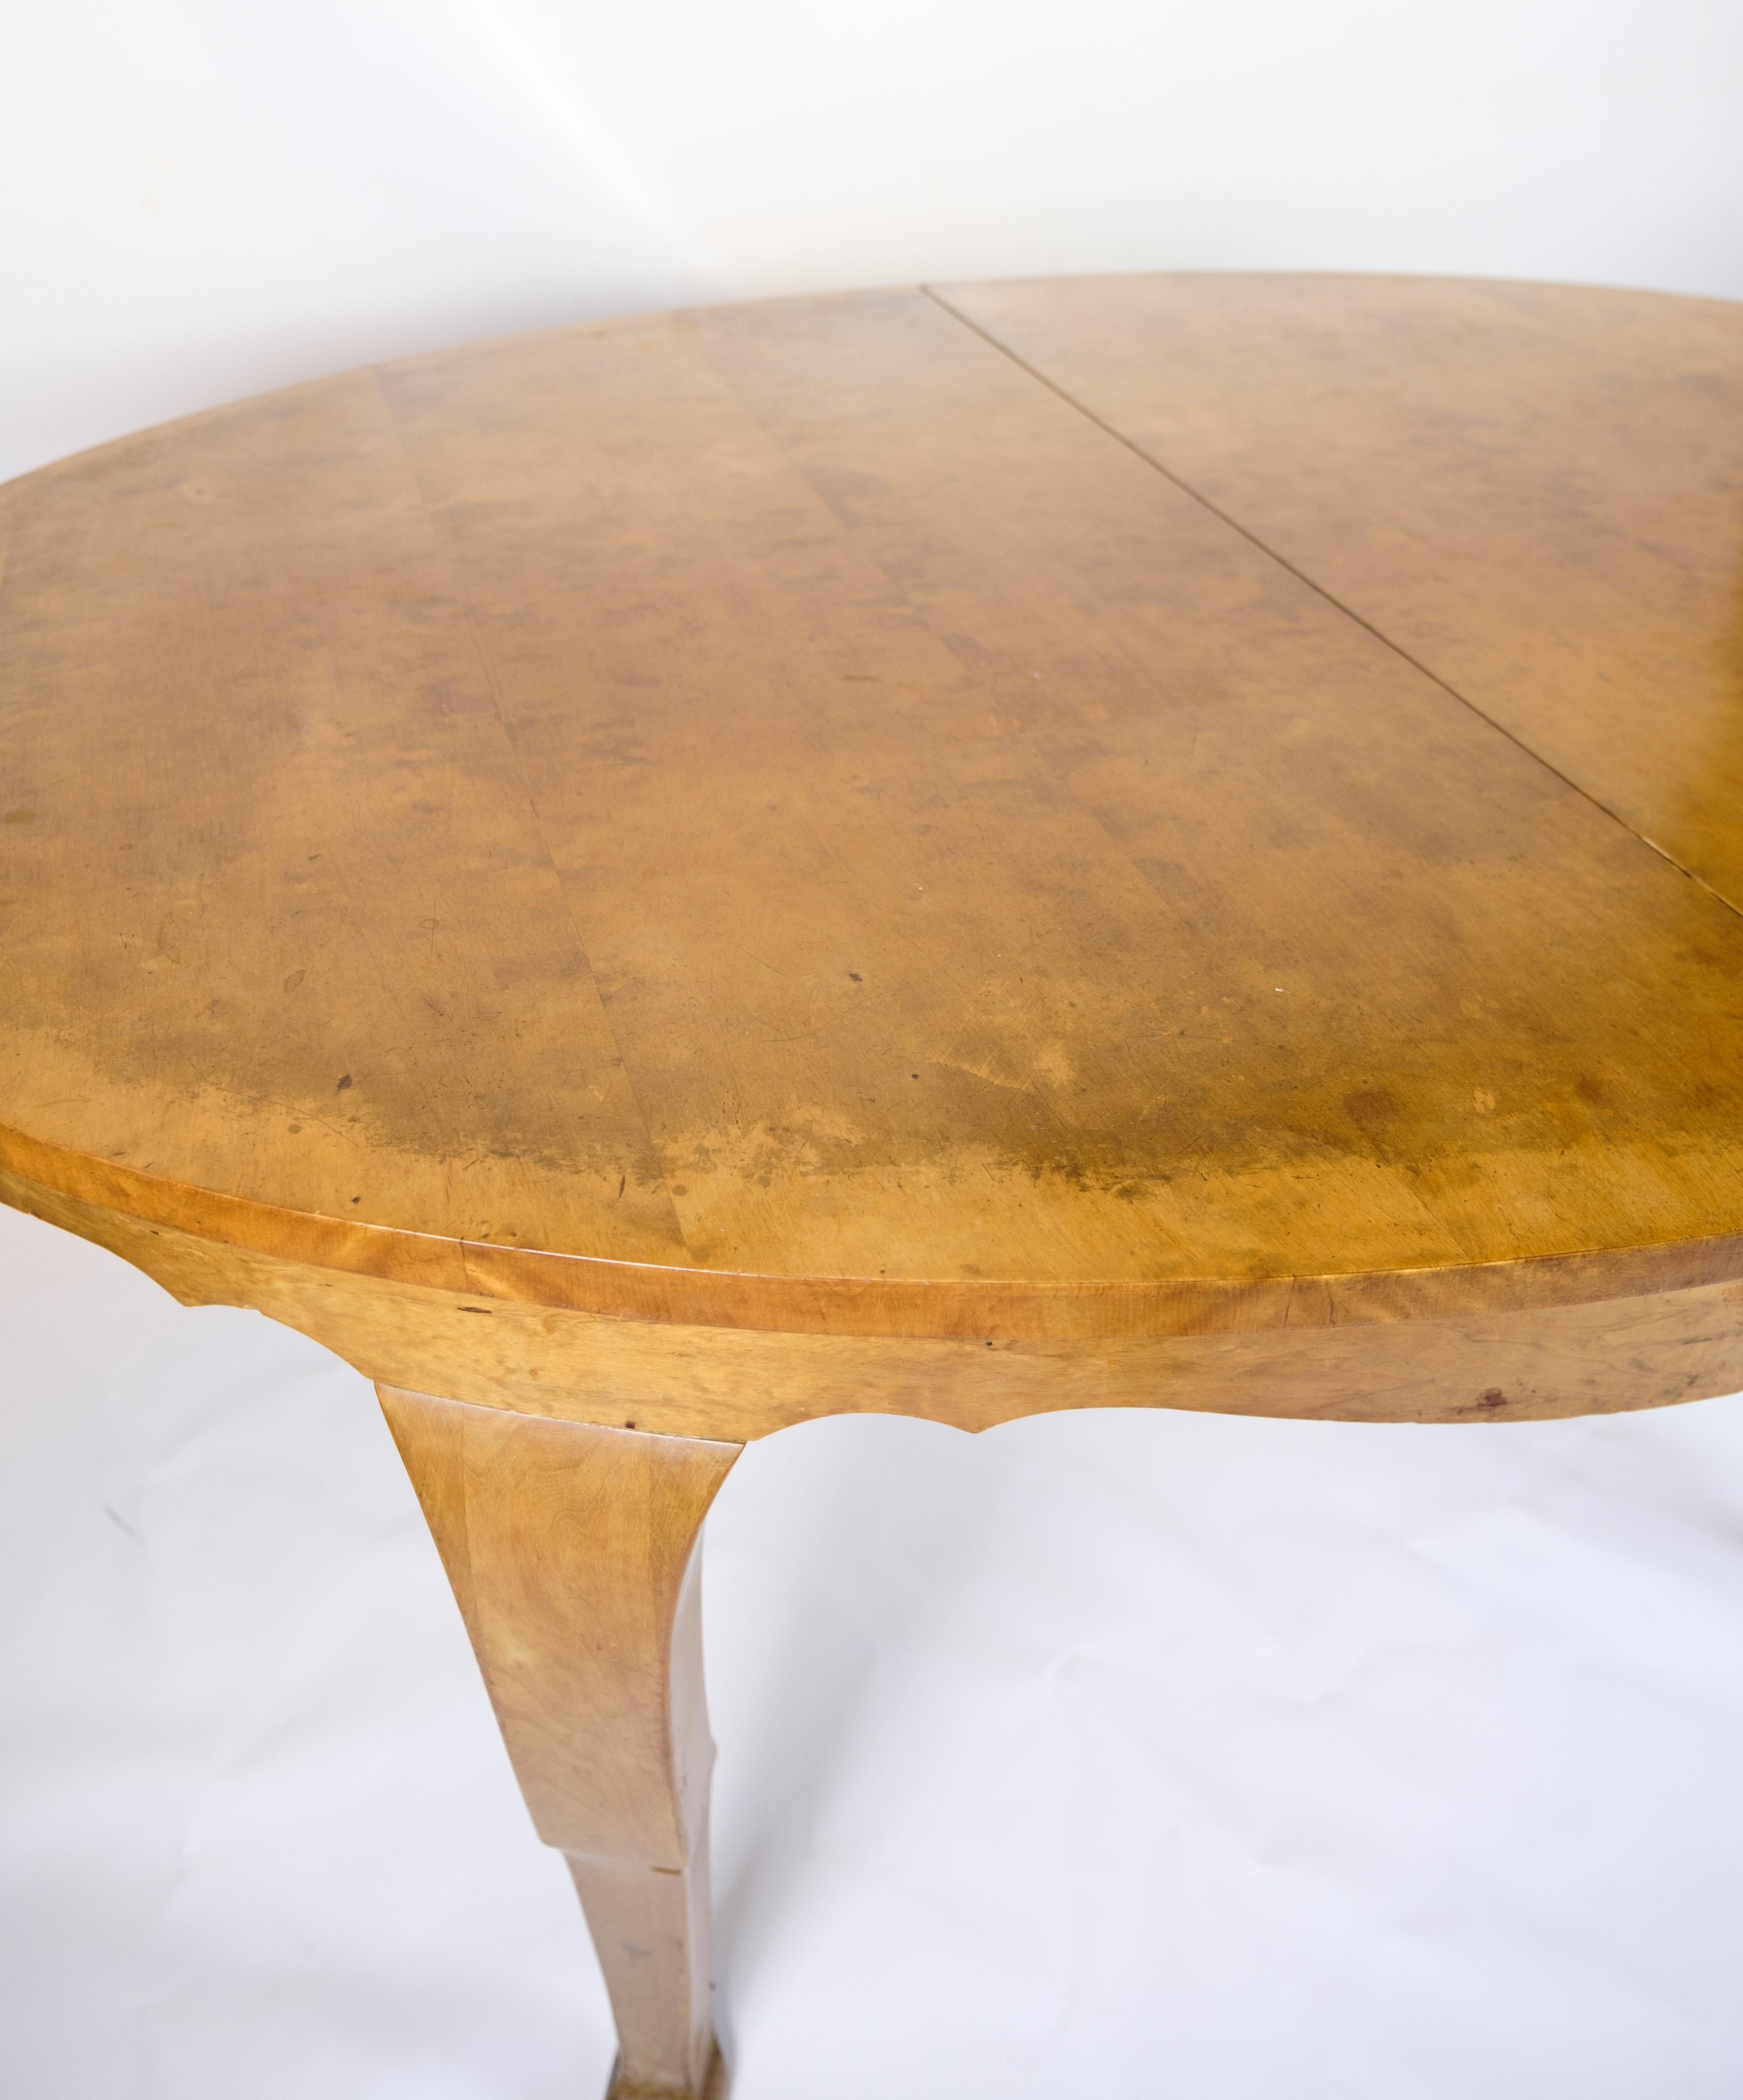 Dining table with additional plates made of birch wood from around the 1920s.
Dimensions in cm: H:77 W:157 D:110. 3 additional plates included. Total length: 286